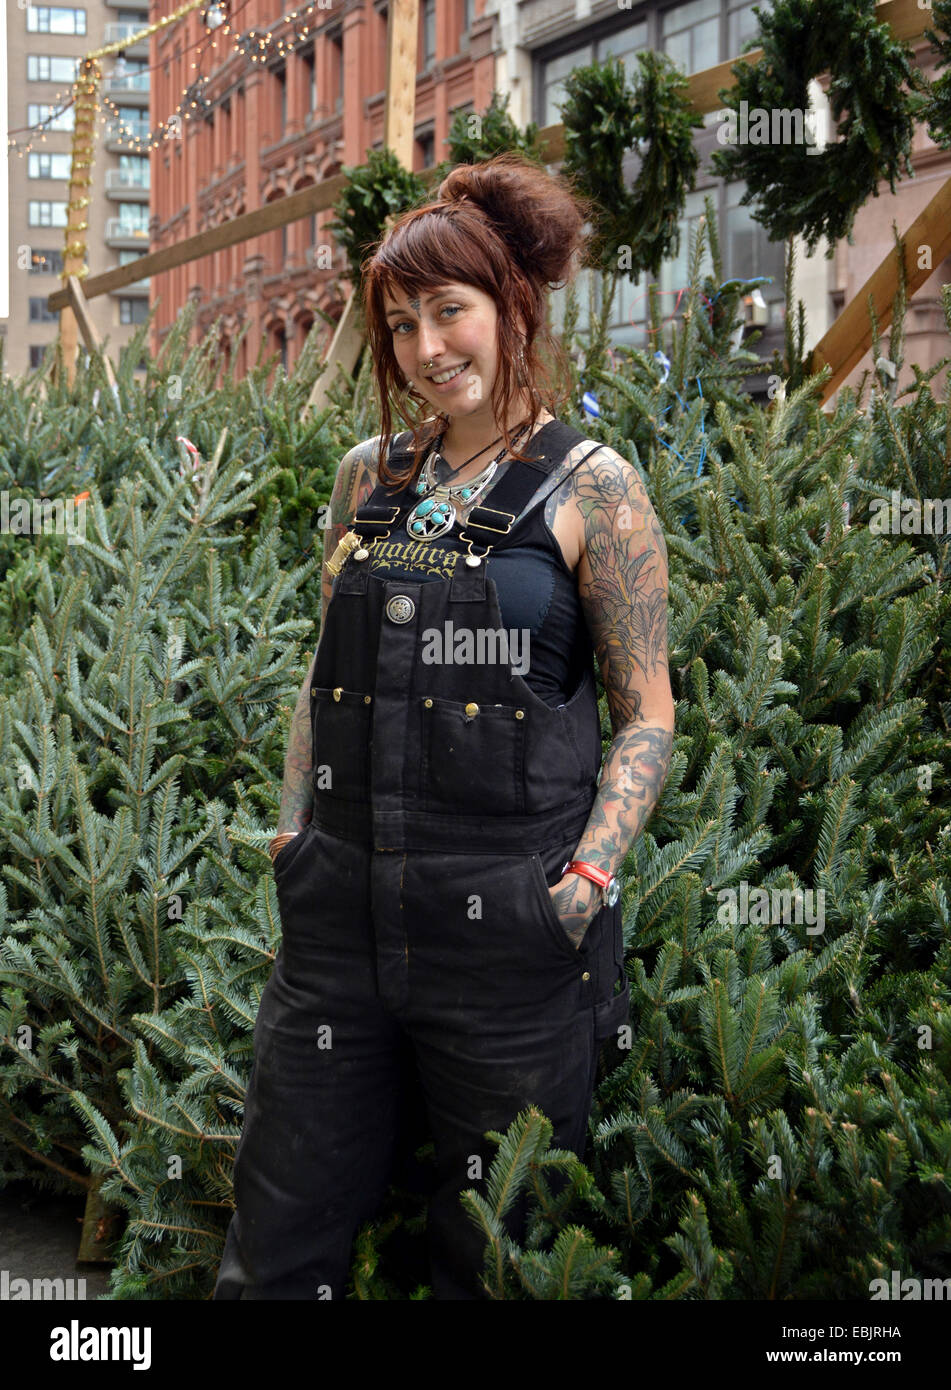 Portrait of a Scottish woman with tattoos selling Christmas trees on Astor Place in Greenwich Village, Manhattan, New York City Stock Photo